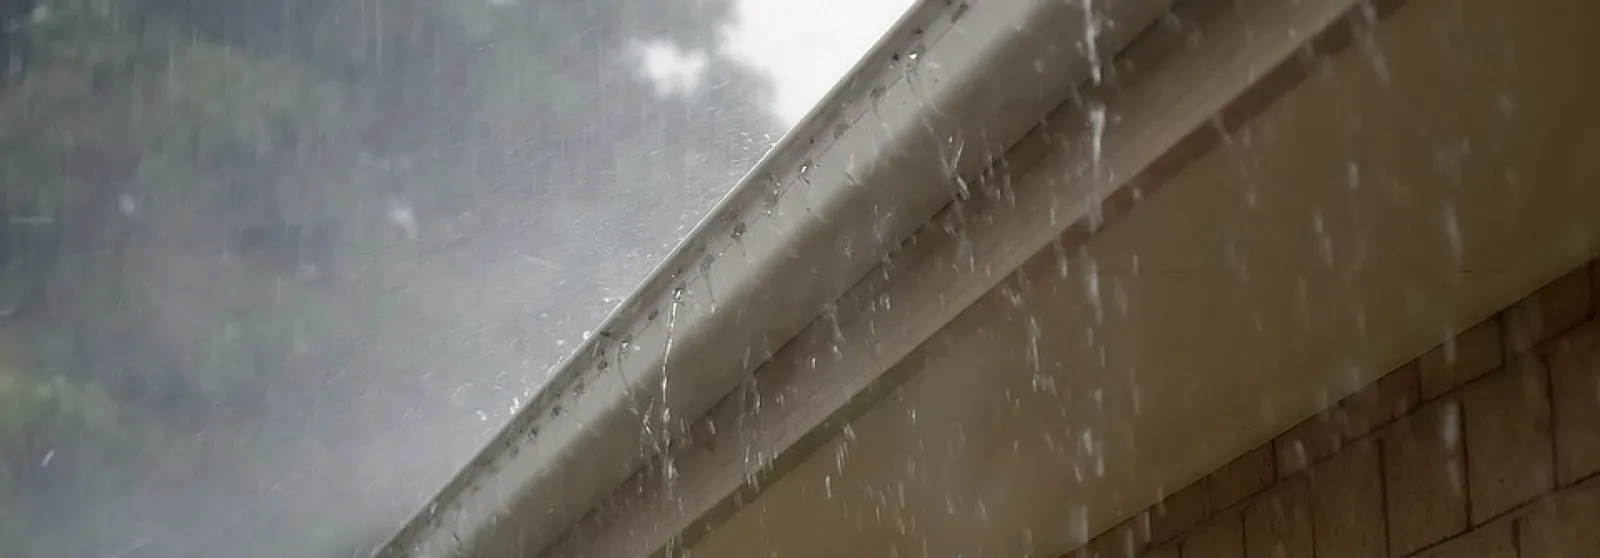 How to Prevent Water Damage to your Home’s Exterior